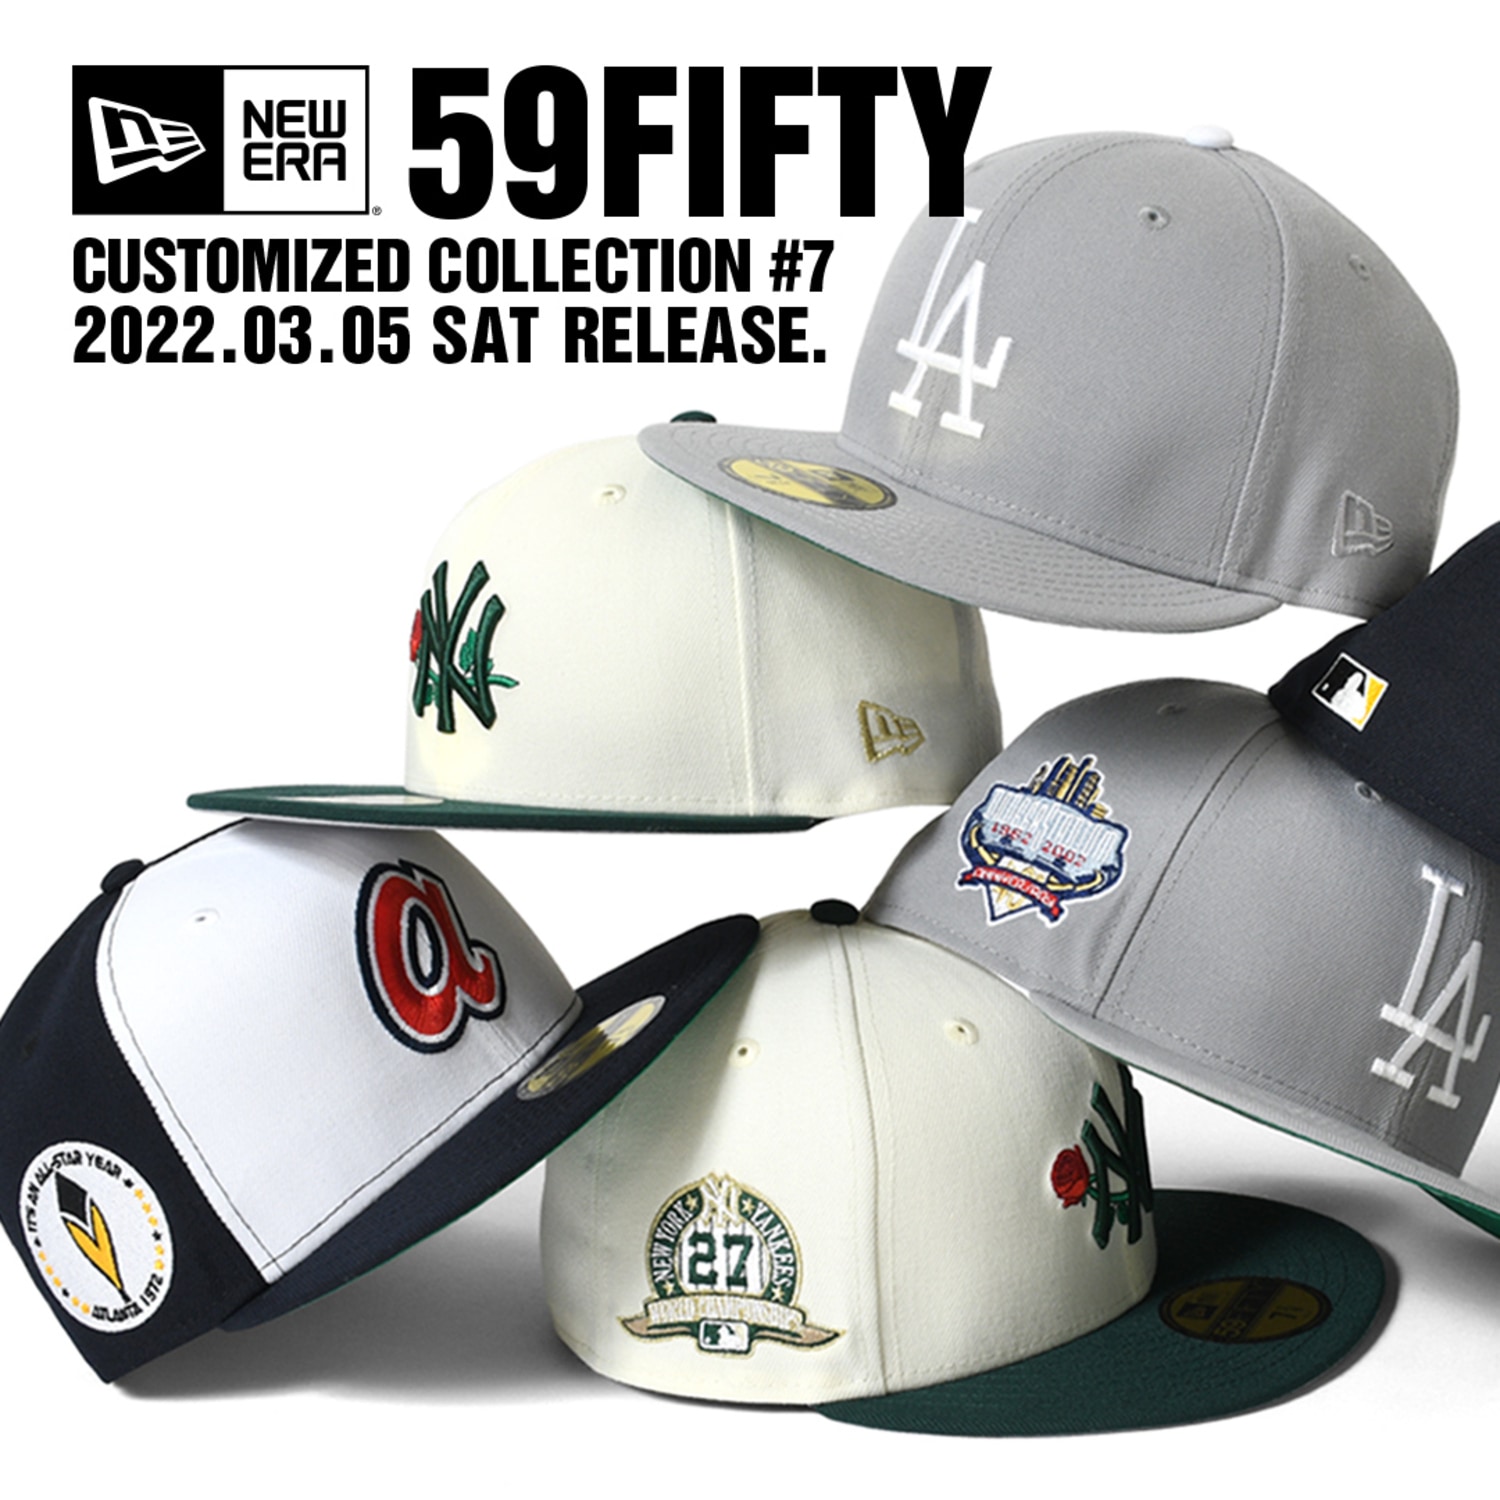 NEW ERA 59FIFTY CUSTOMIZED COLLECTION #7 3/5(金)抽選開始